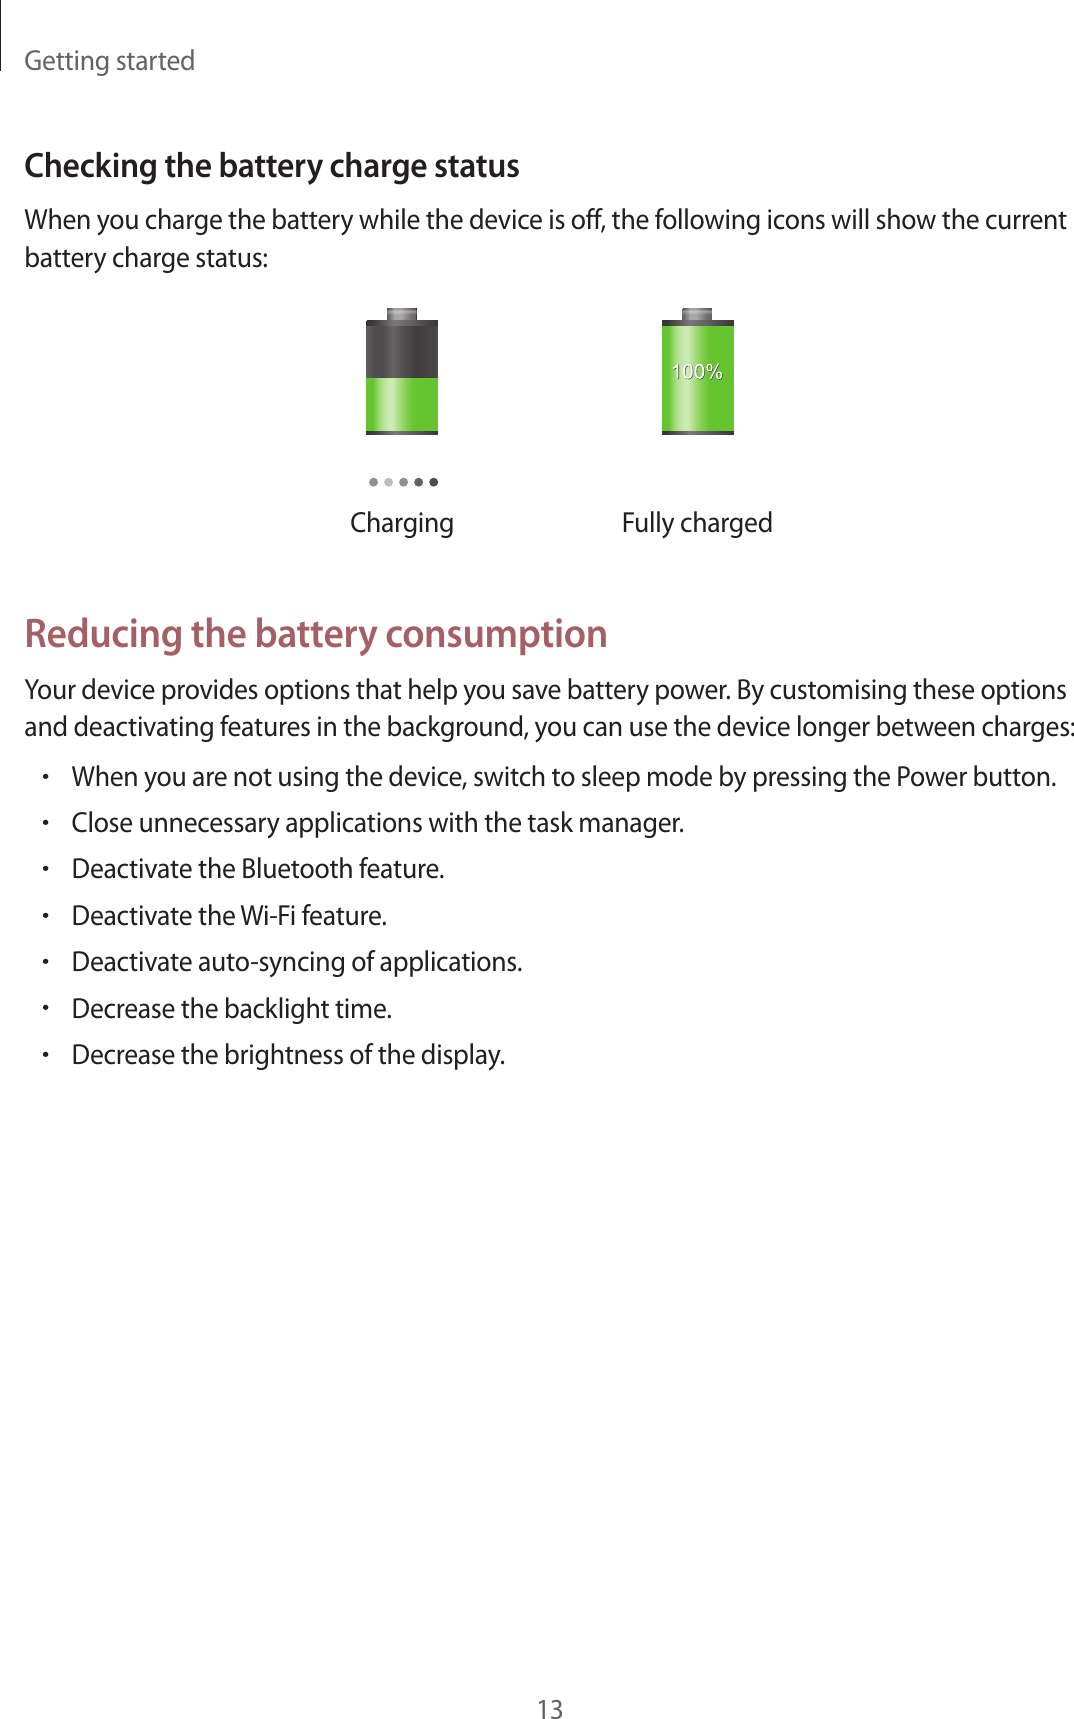 Getting started13Checking the battery charge statusWhen you charge the battery while the device is off, the following icons will show the current battery charge status:Charging Fully chargedReducing the battery consumptionYour device provides options that help you save battery power. By customising these options and deactivating features in the background, you can use the device longer between charges:•When you are not using the device, switch to sleep mode by pressing the Power button.•Close unnecessary applications with the task manager.•Deactivate the Bluetooth feature.•Deactivate the Wi-Fi feature.•Deactivate auto-syncing of applications.•Decrease the backlight time.•Decrease the brightness of the display.